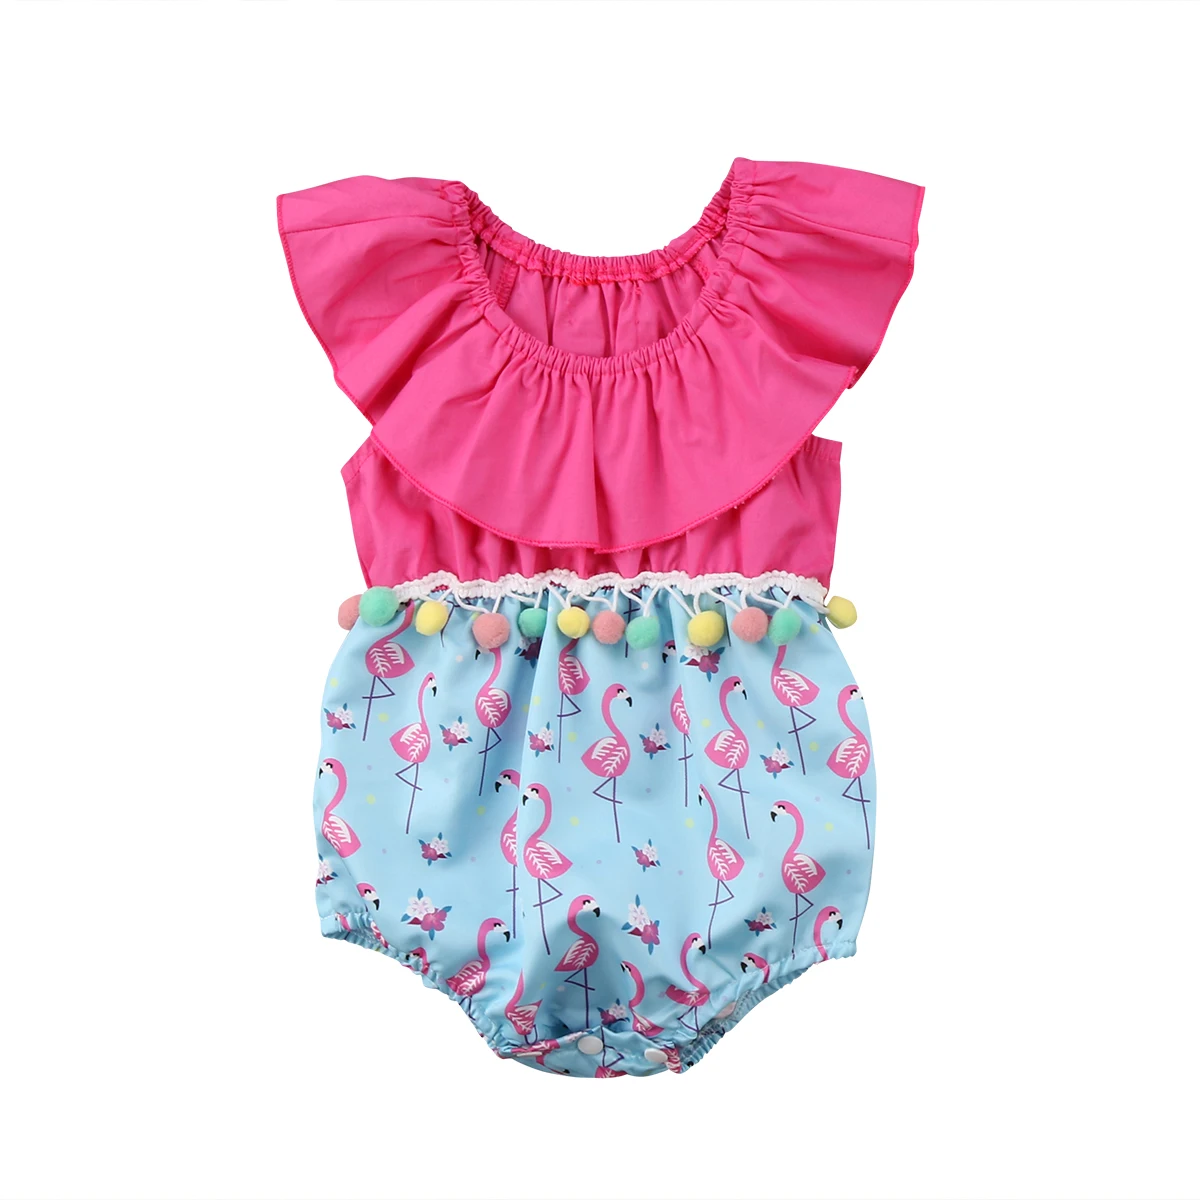 

Pudcoco Newborn Kids Baby Girl Romper Cute Flamingo print POM POM Romper infant baby girls clothes Outfit